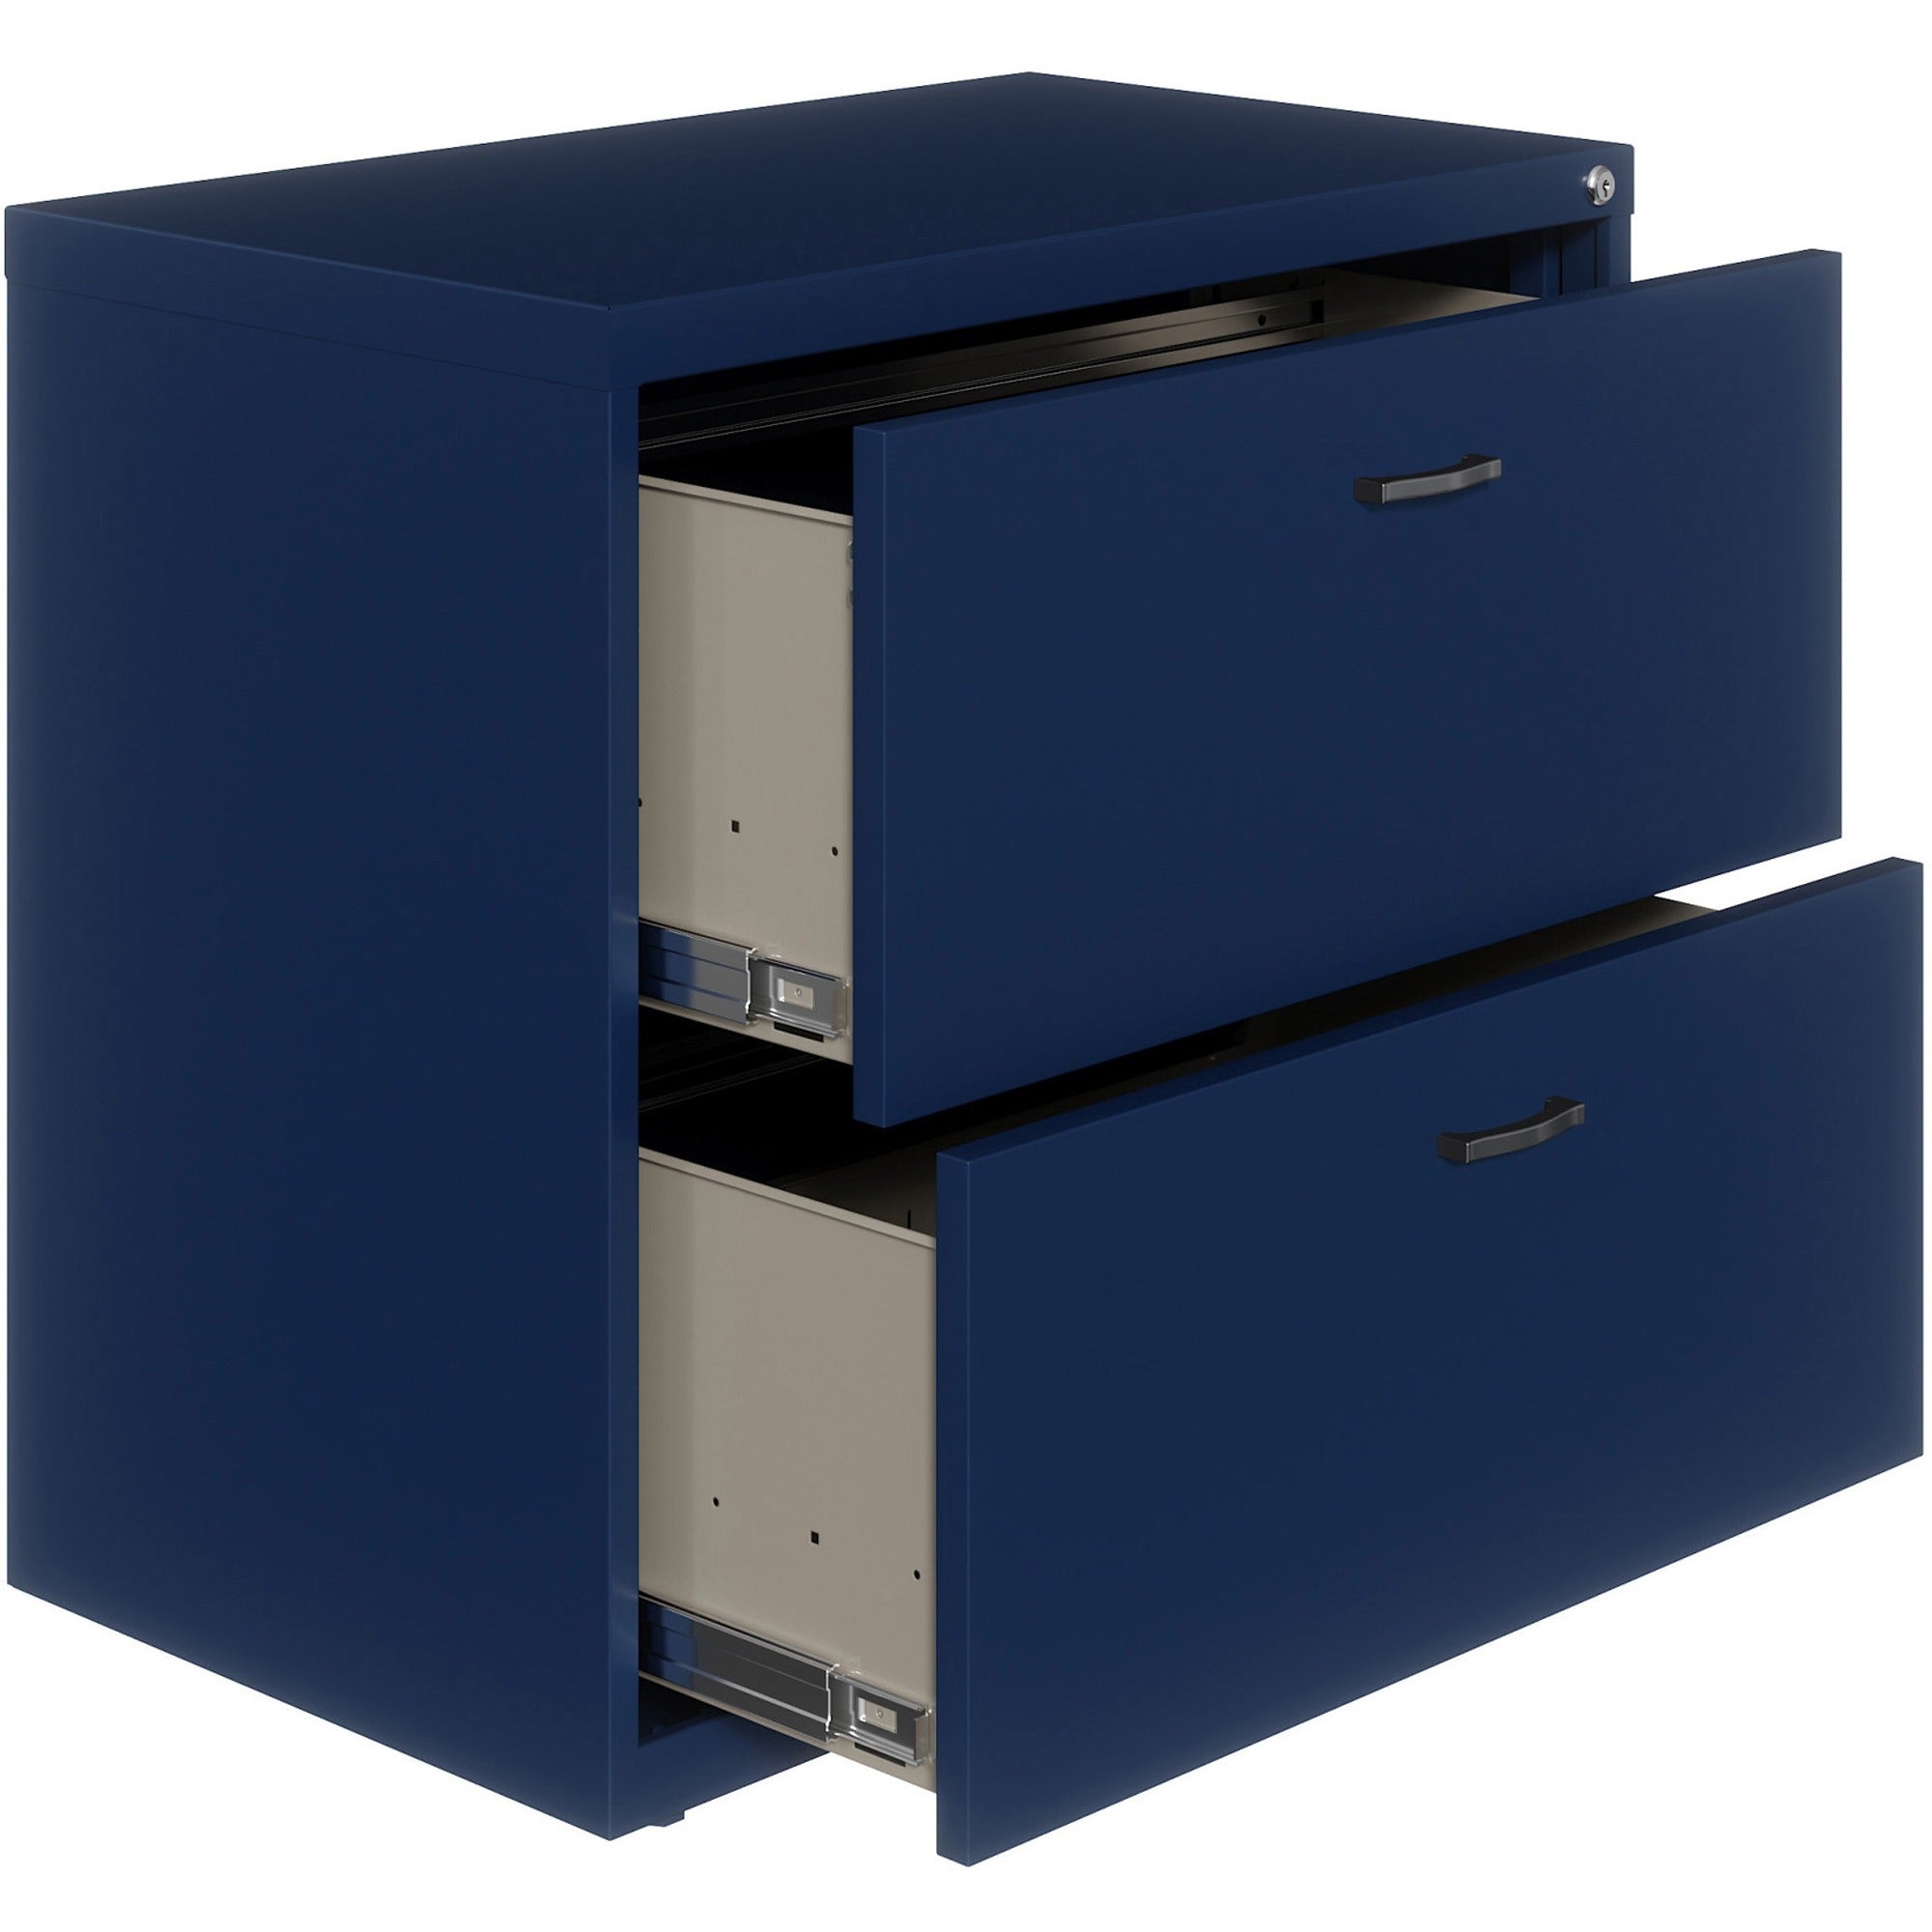 nusparc-2-drawer-lateral-file-30-x-176-x-277-2-x-drawers-for-file-letter-lateral-interlocking-anti-tip-ball-bearing-slide-ball-bearing-suspension-removable-lock-leveling-glide-adjustable-glide-durable-nonporous-surface-blue_nprlf218aany - 4